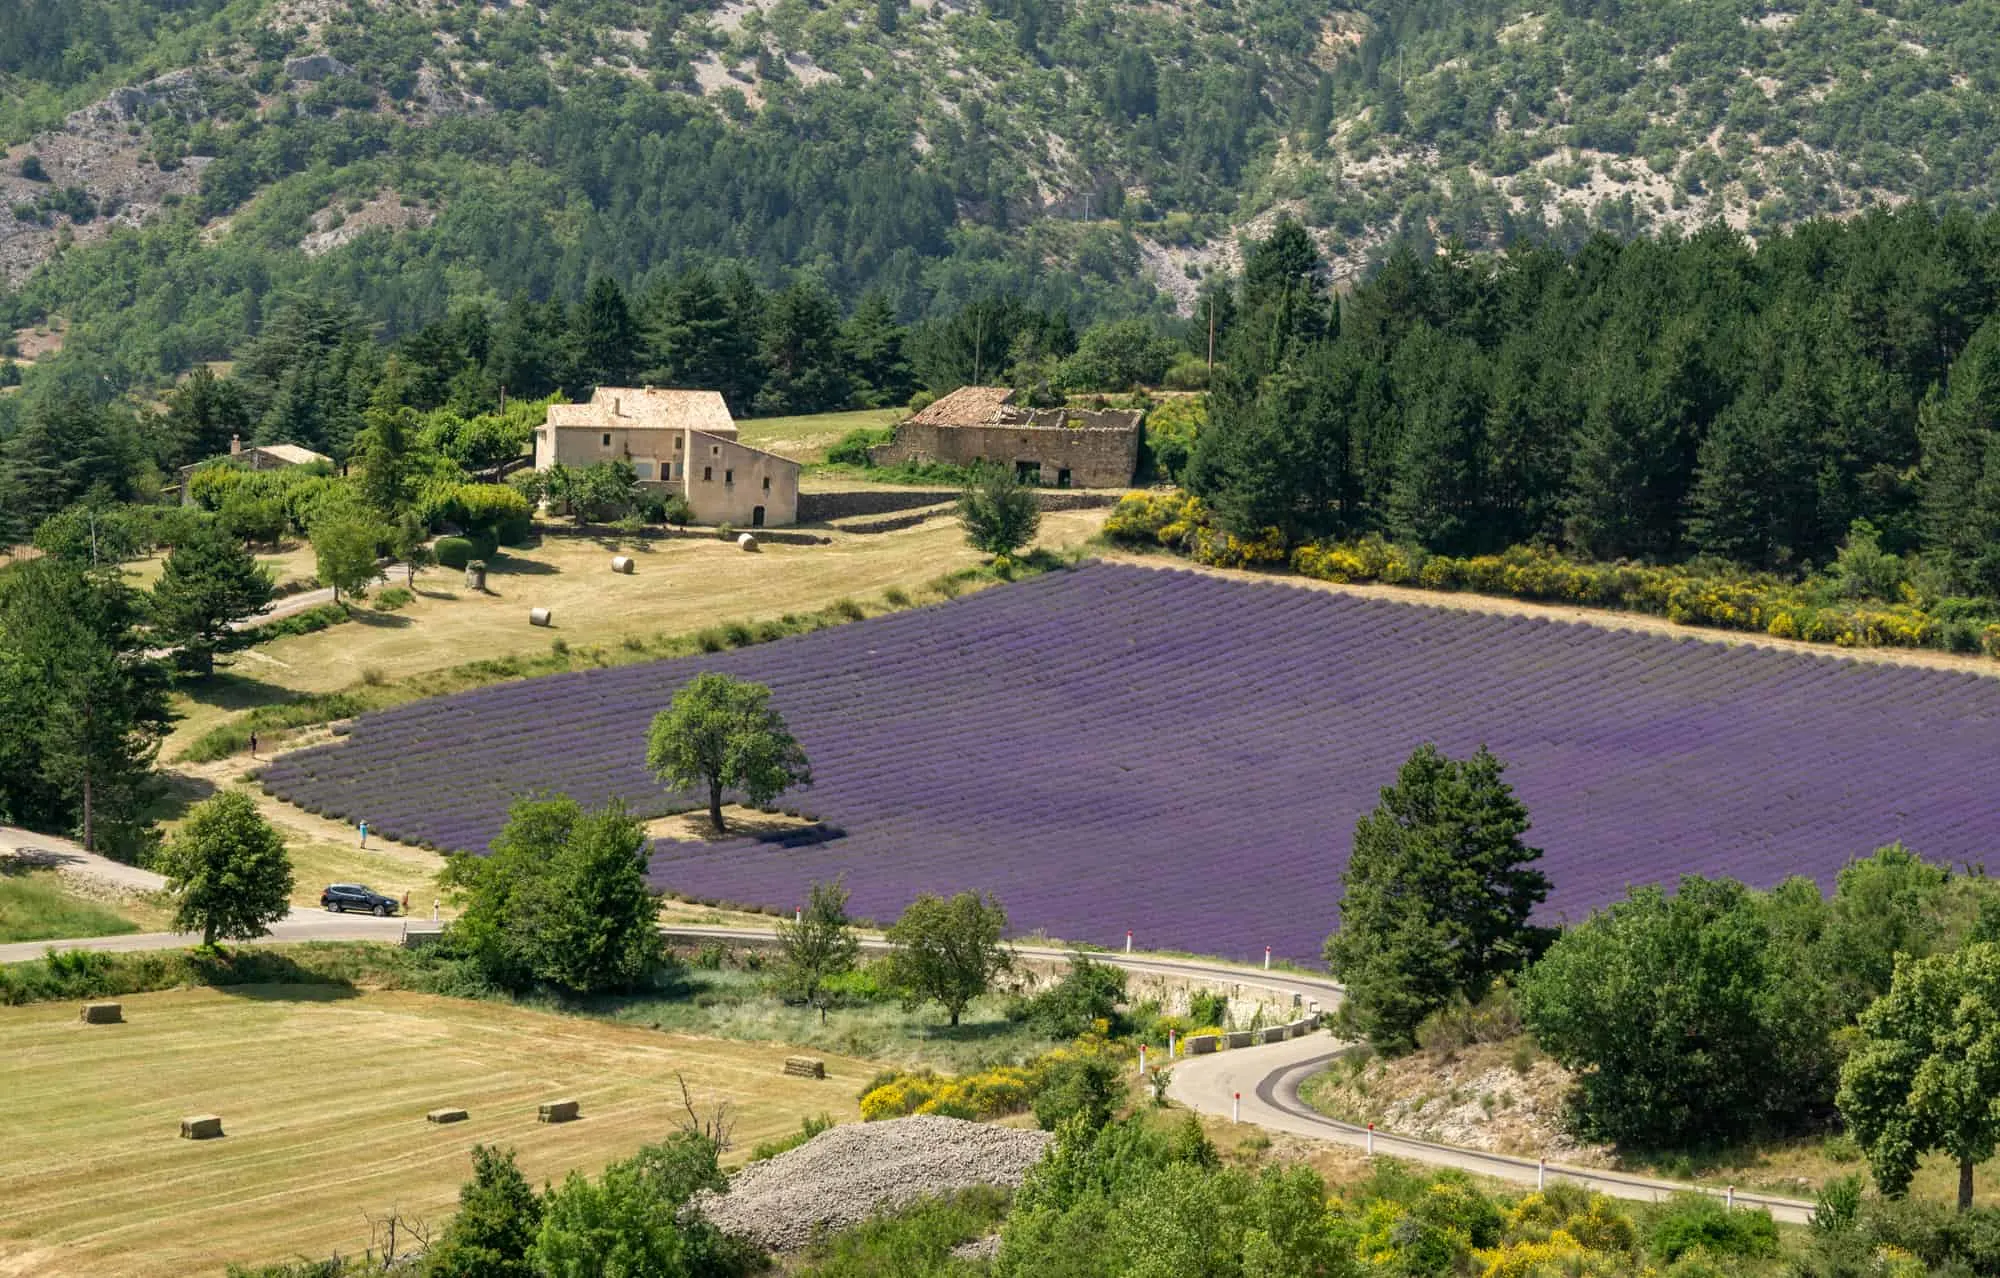 Sault lavender fields itinerary